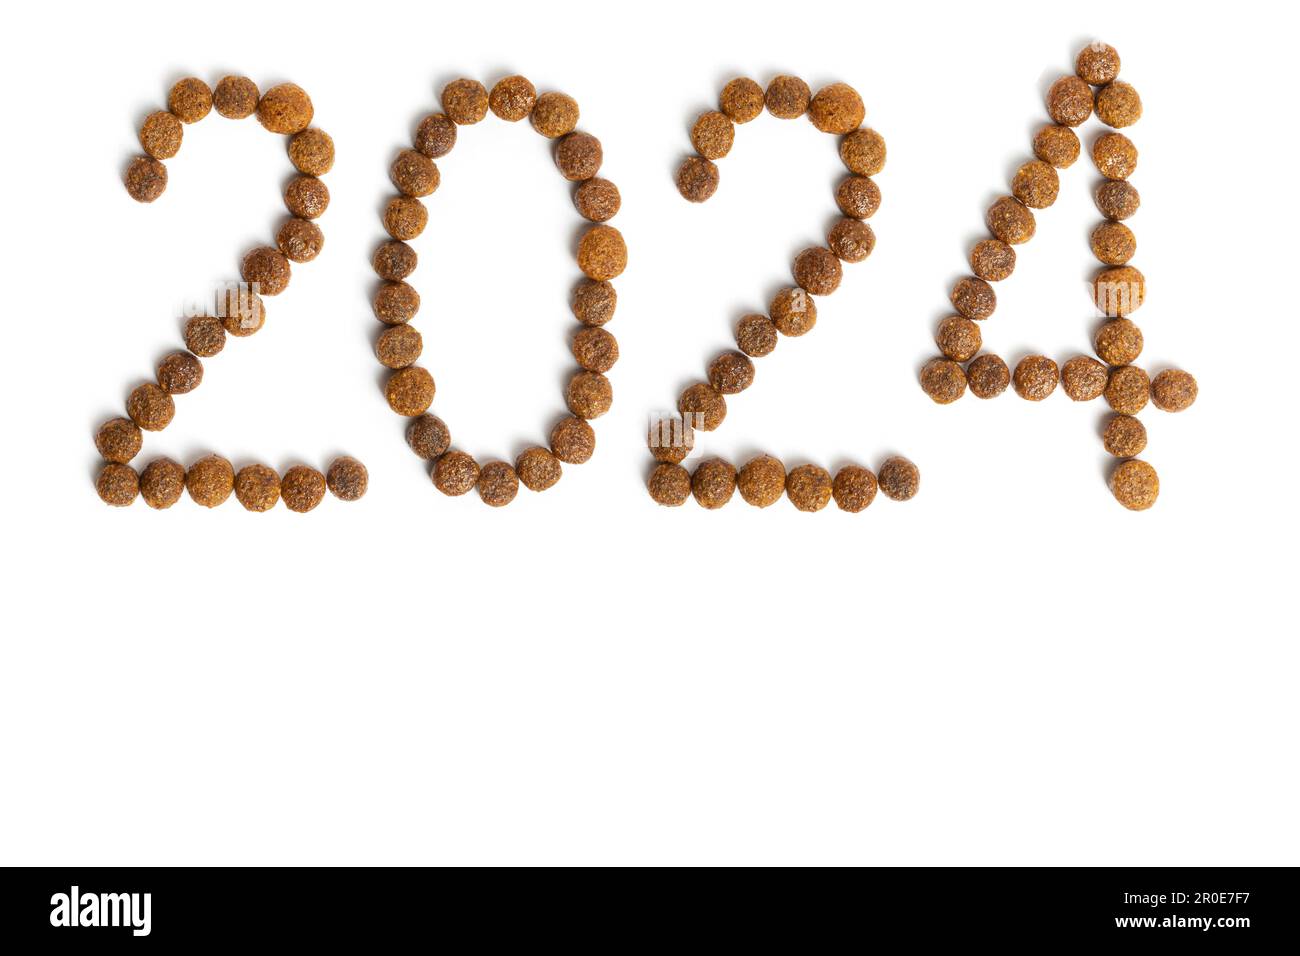 Calendar 2024 from Dry pet food on a white background. Granules of good nutrition for dogs and cats. Food for the animals. Brown homogeneous pieces of Stock Photo